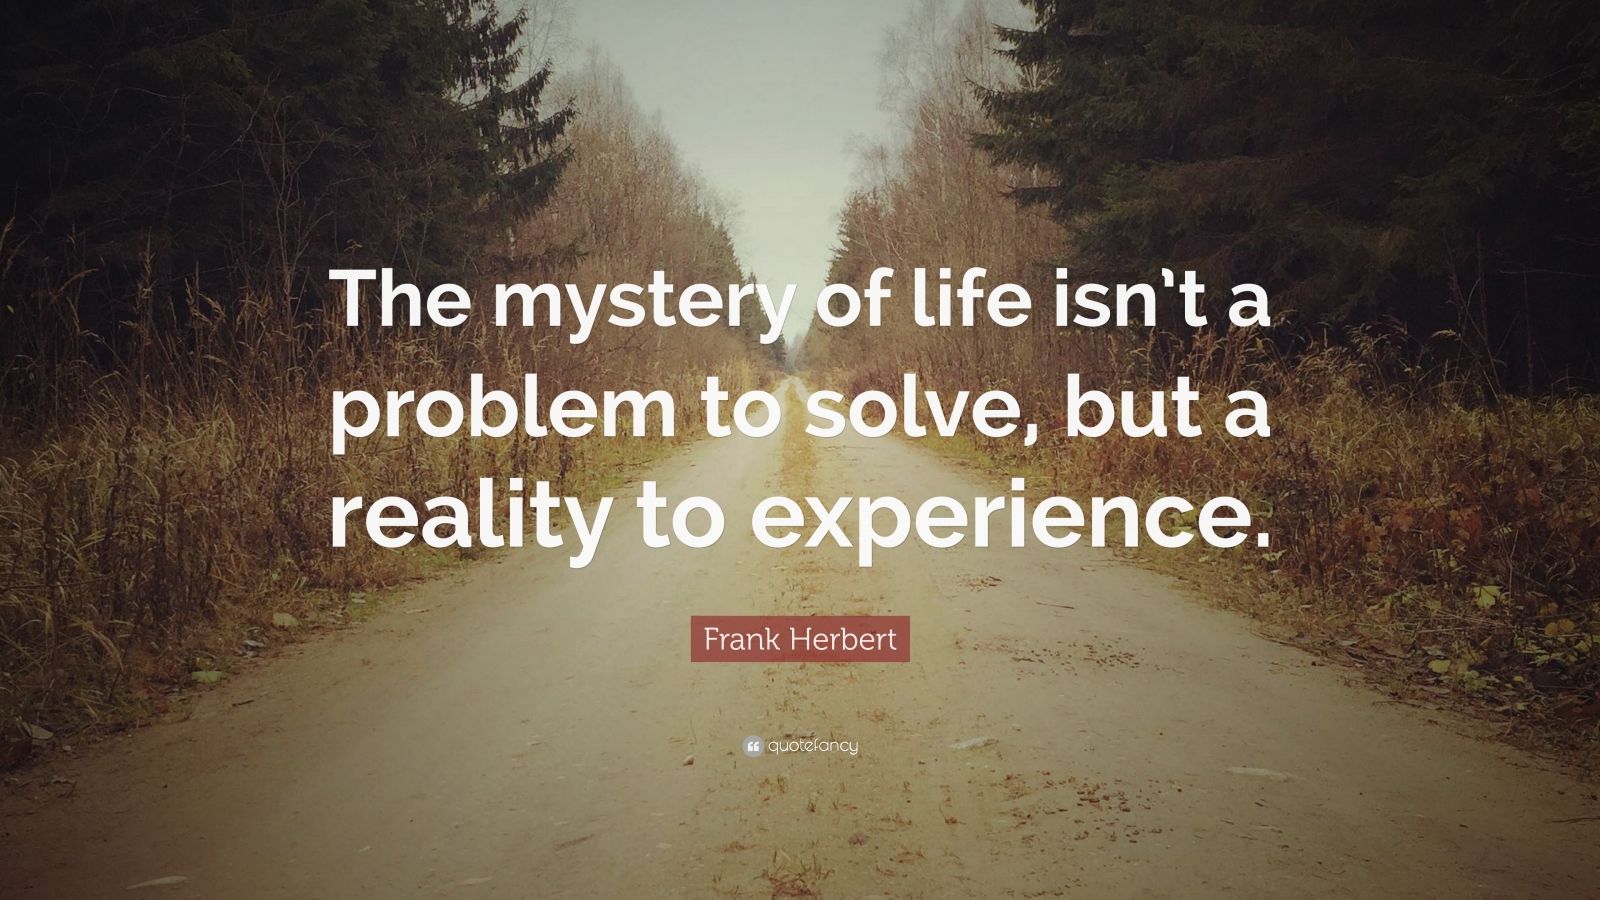 Frank Herbert Quote “The mystery of life isn’t a problem